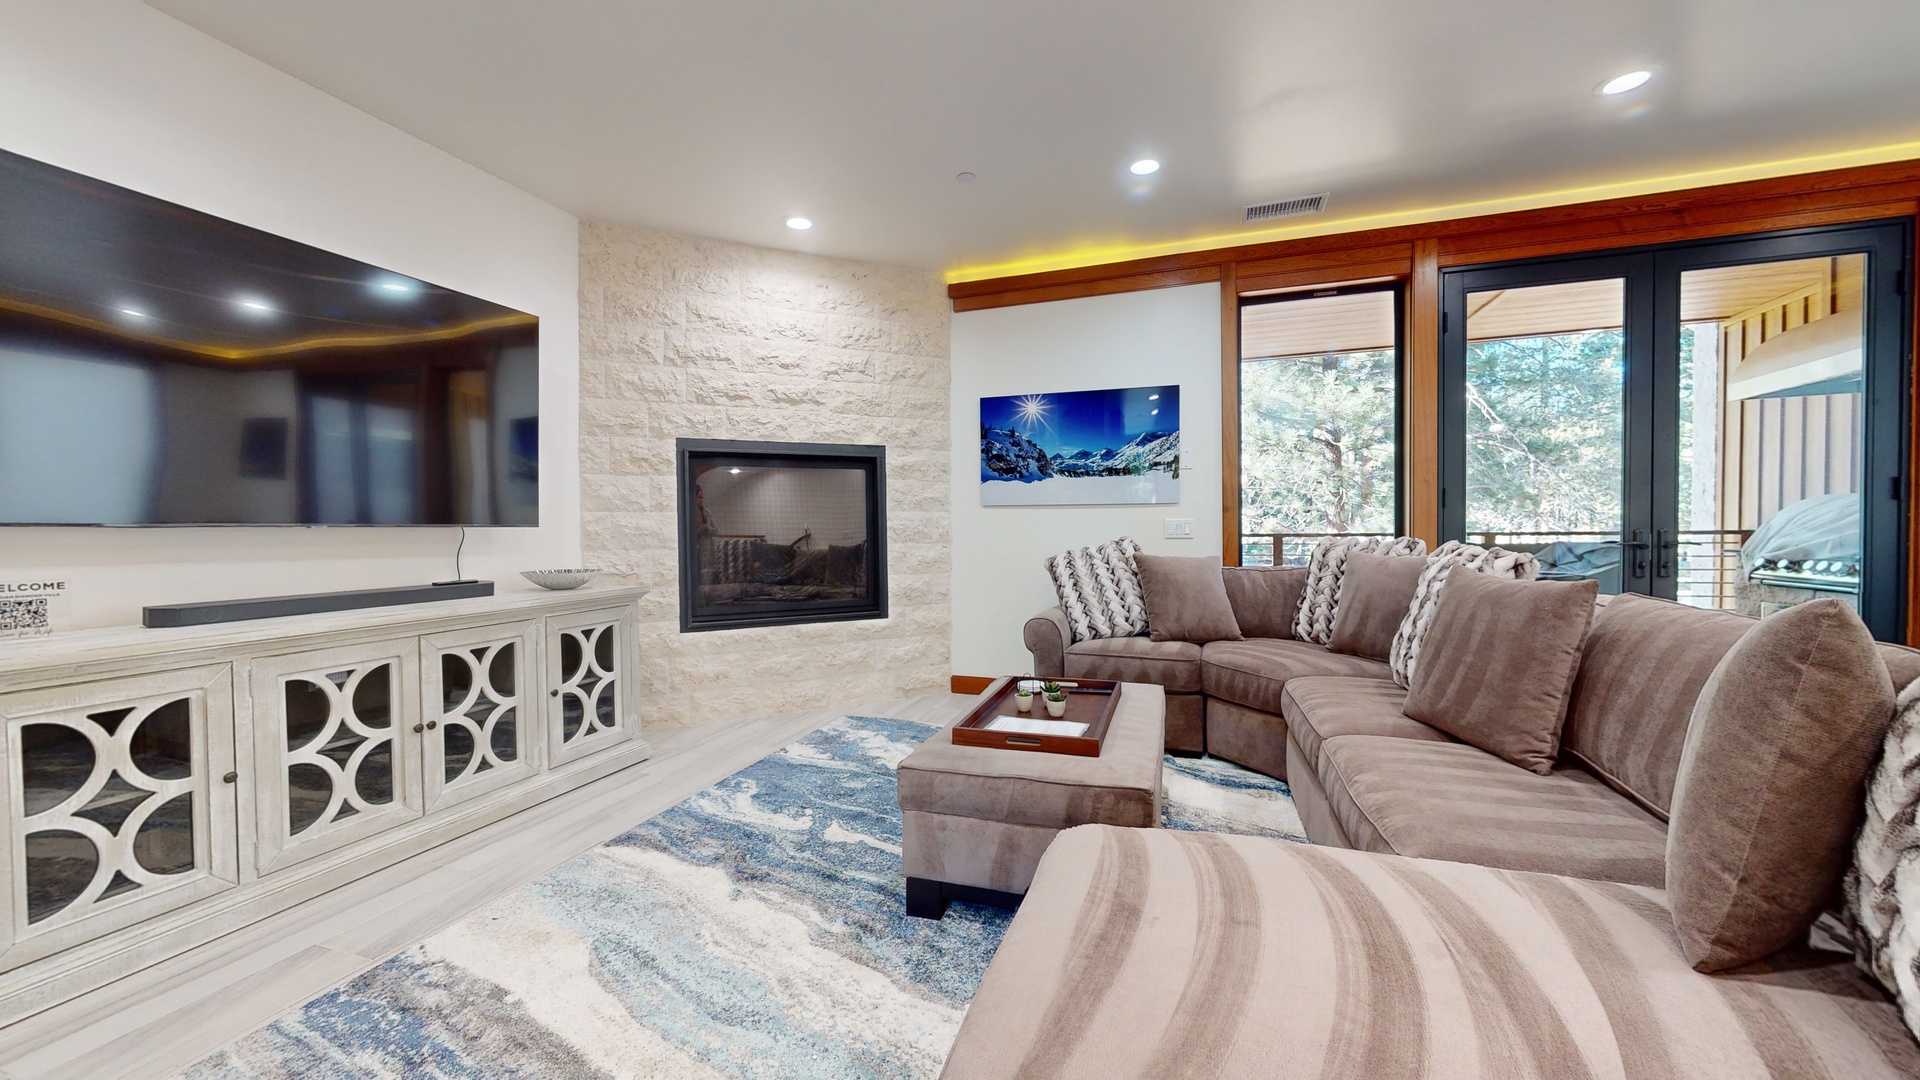 Open living space with balcony access, Smart TV, gas fireplace, and ample seating